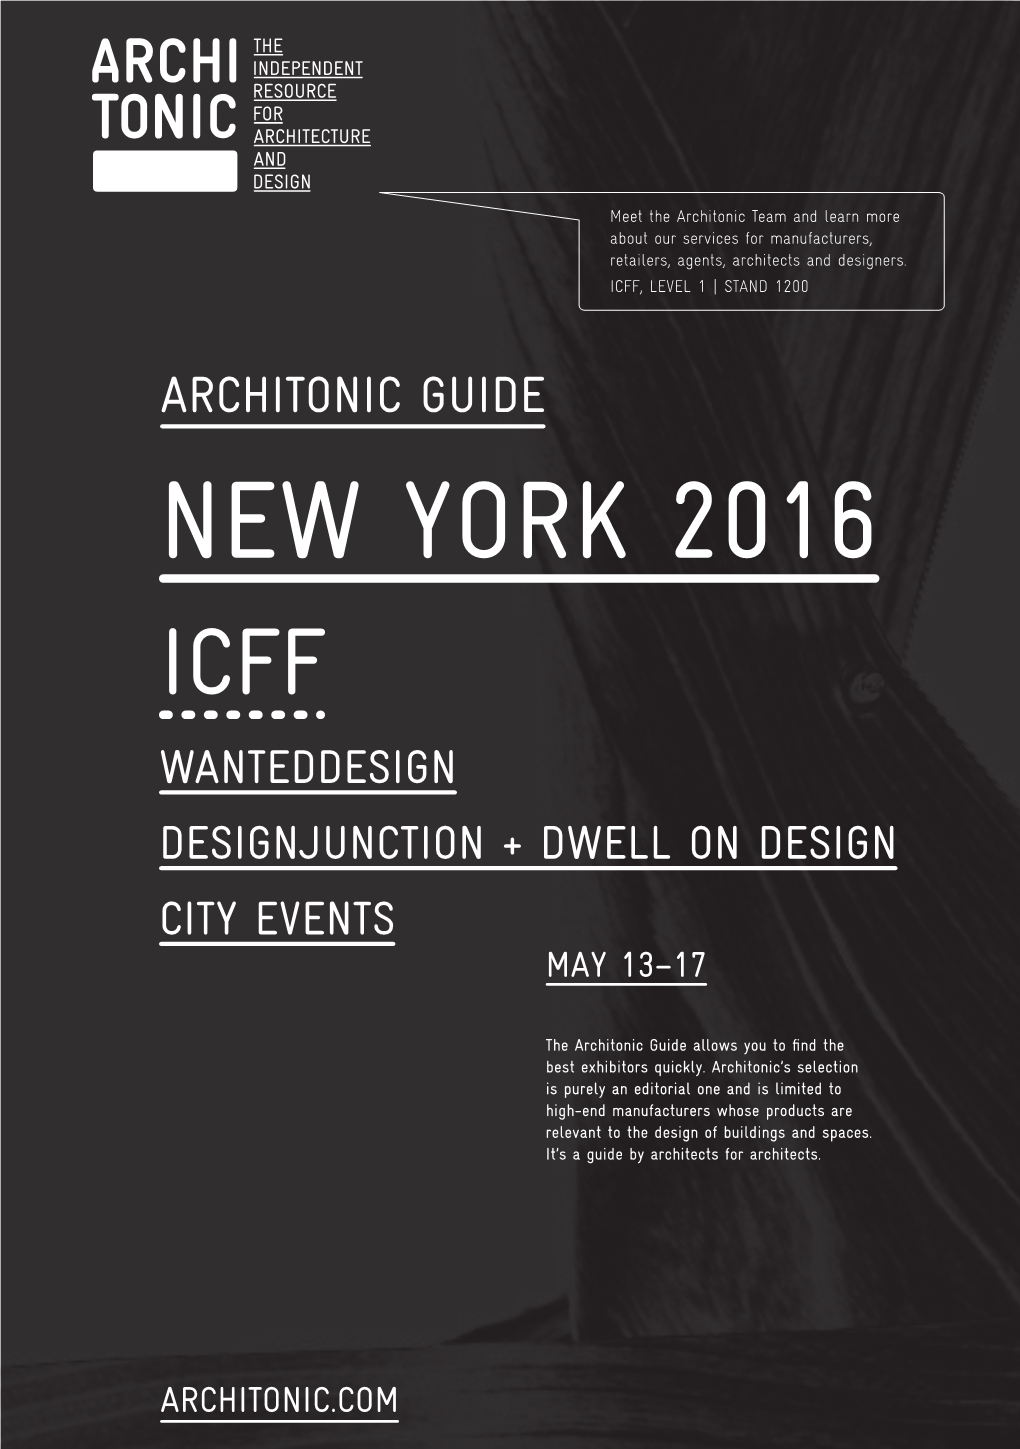 New York 2016 Icff Wanteddesign Designjunction + Dwell on Design City Events May 13–17